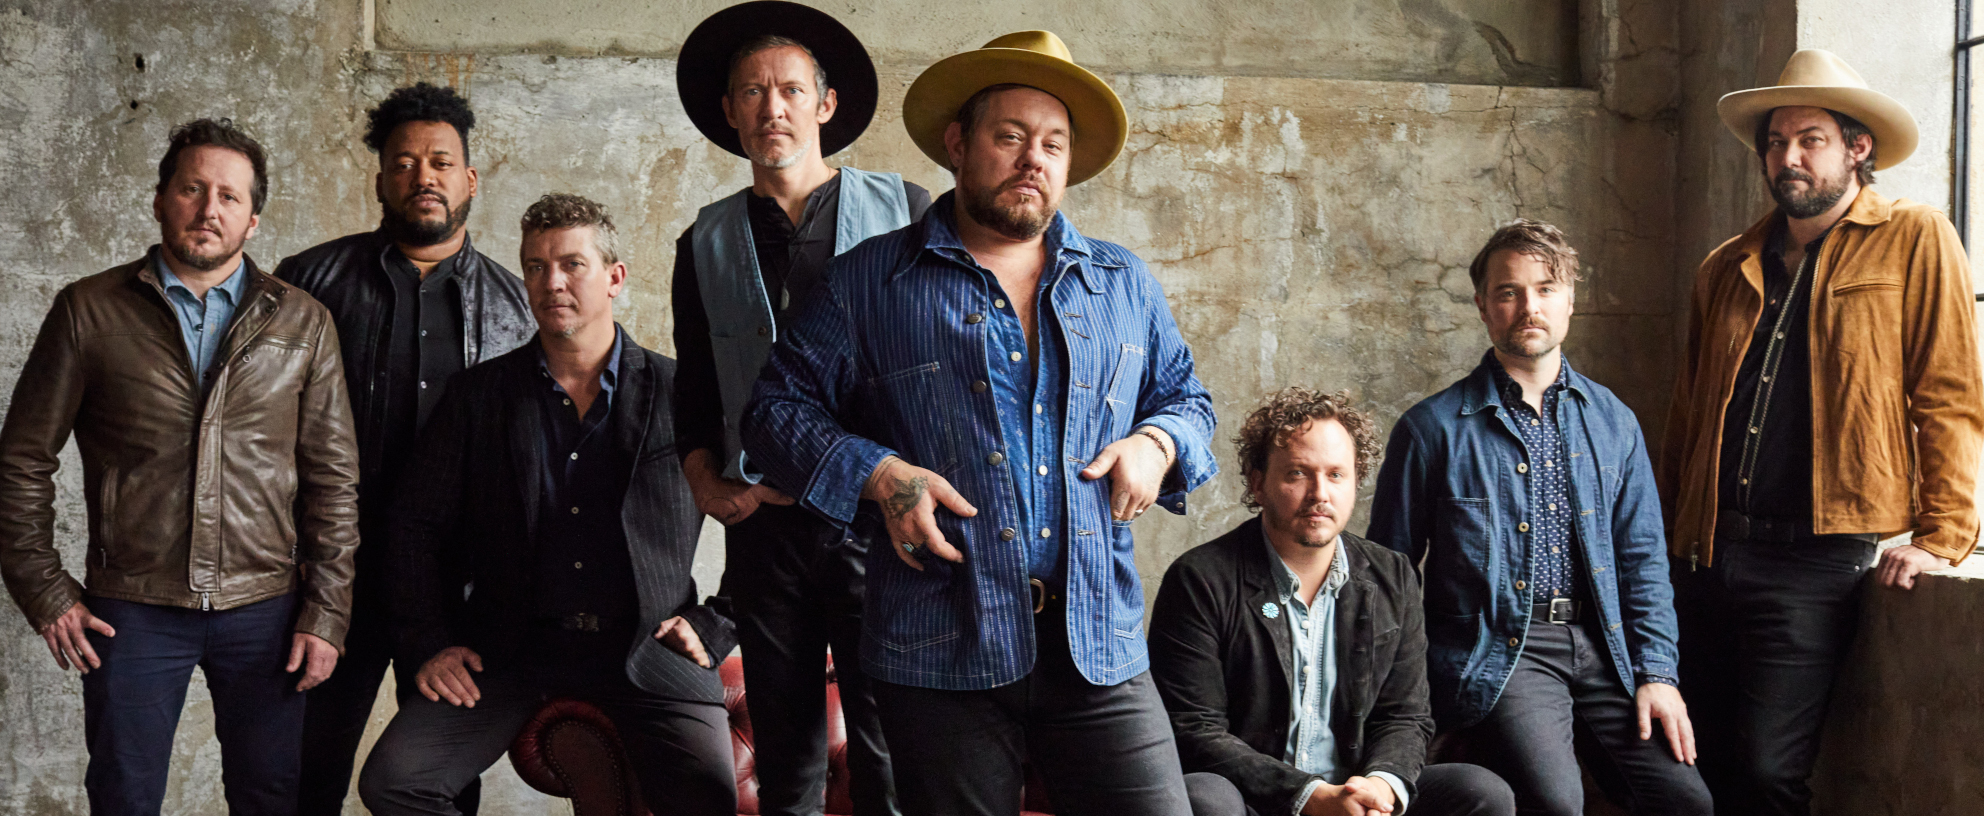 Nathaniel Rateliff & The Night Sweats Are Hopeful About ‘The Future’